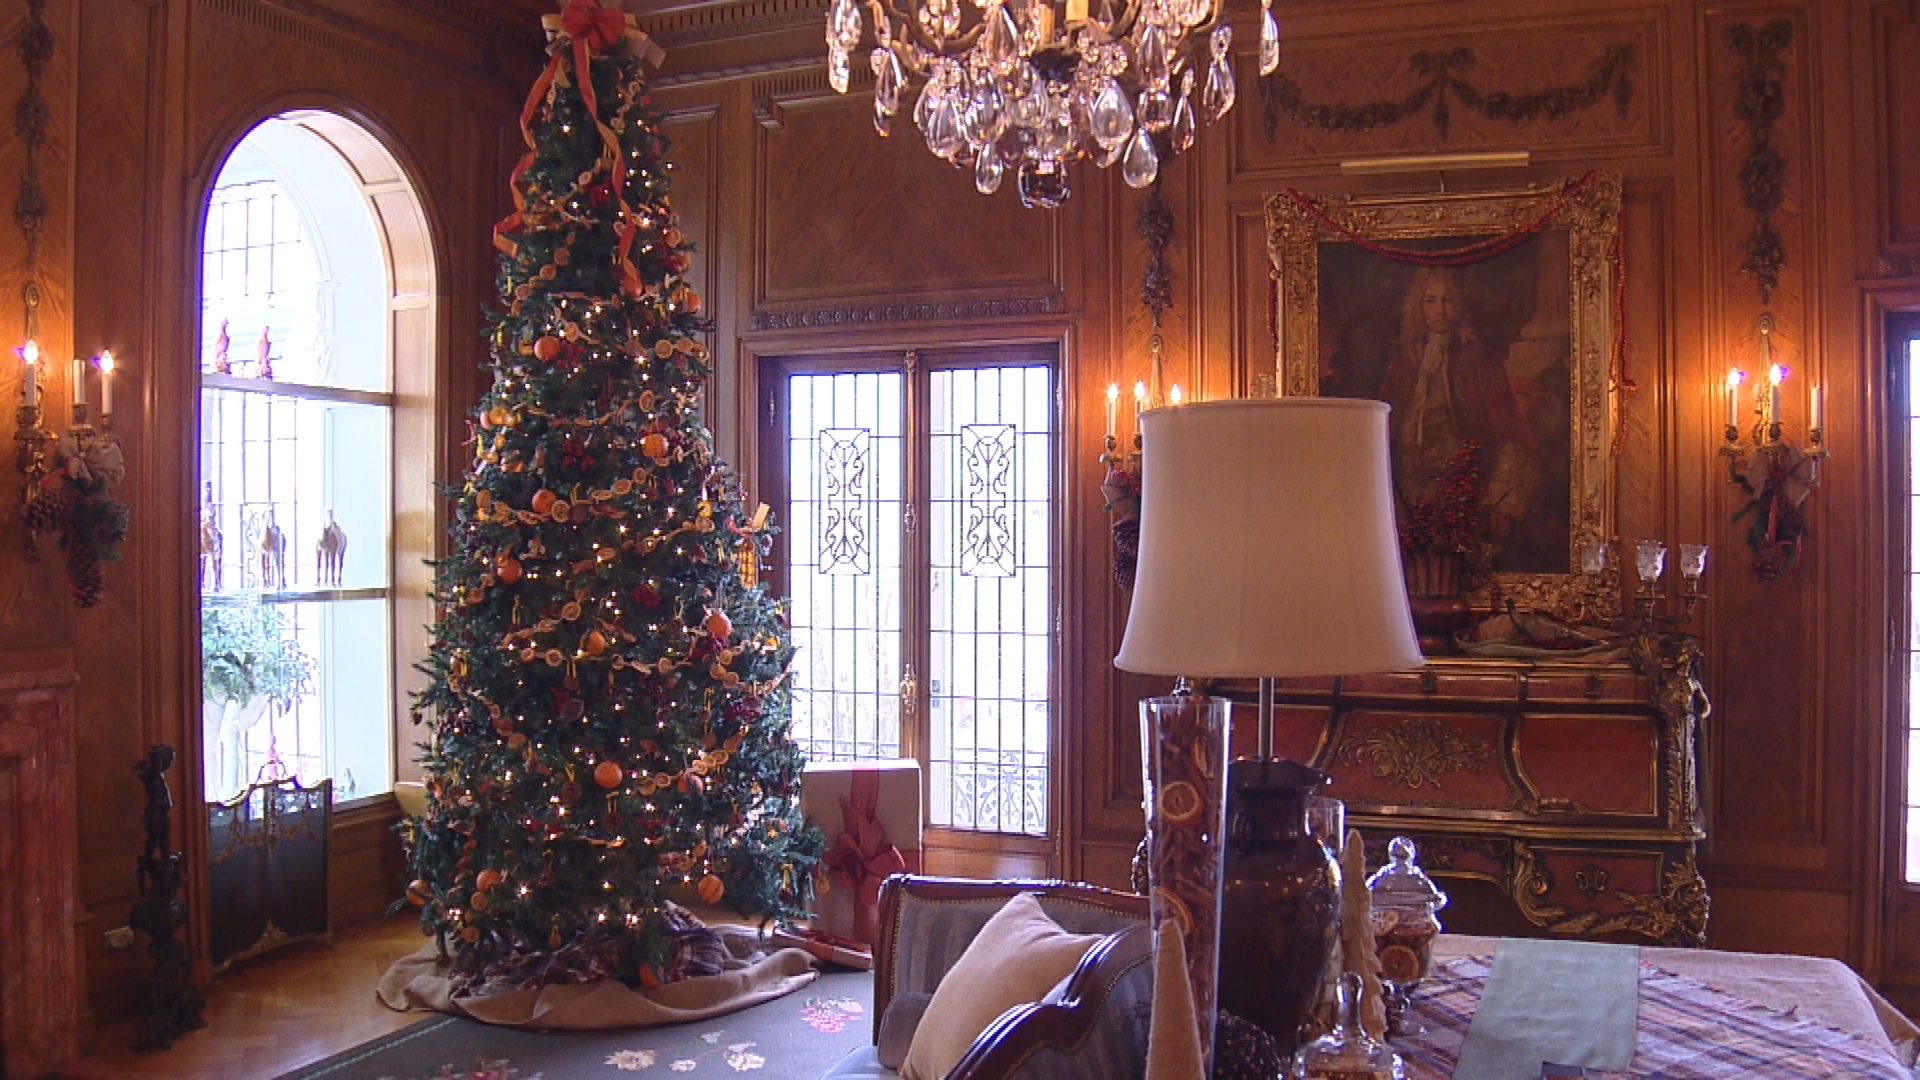 Colorado Governor’s Residence Gets Dressed For The Holidays